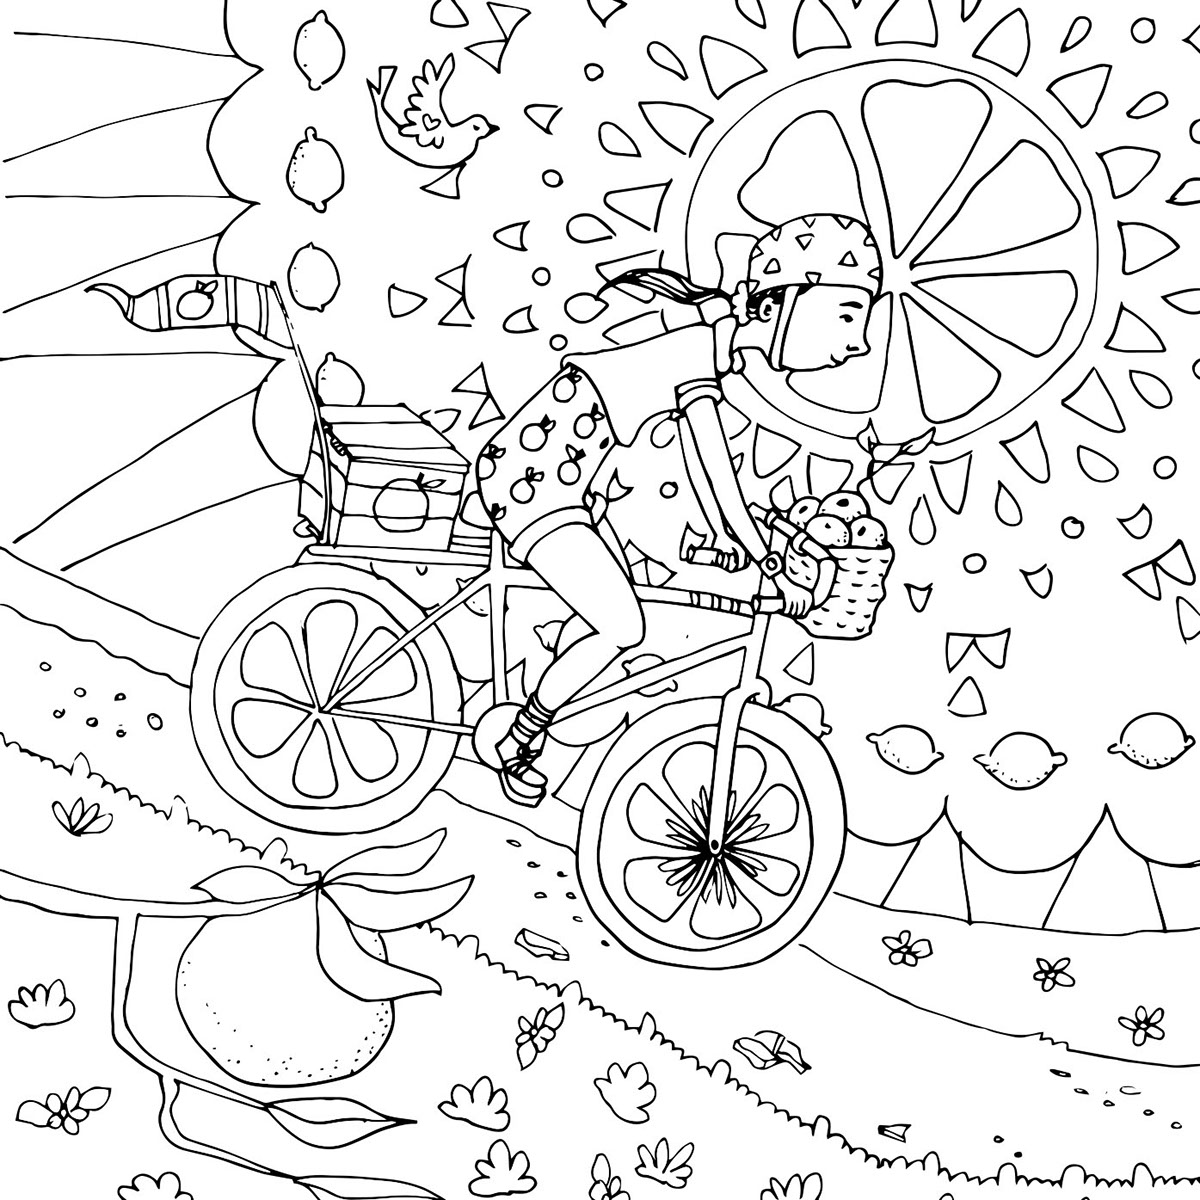 Wellness Health coloring book Playful images ILLUSTRATION 